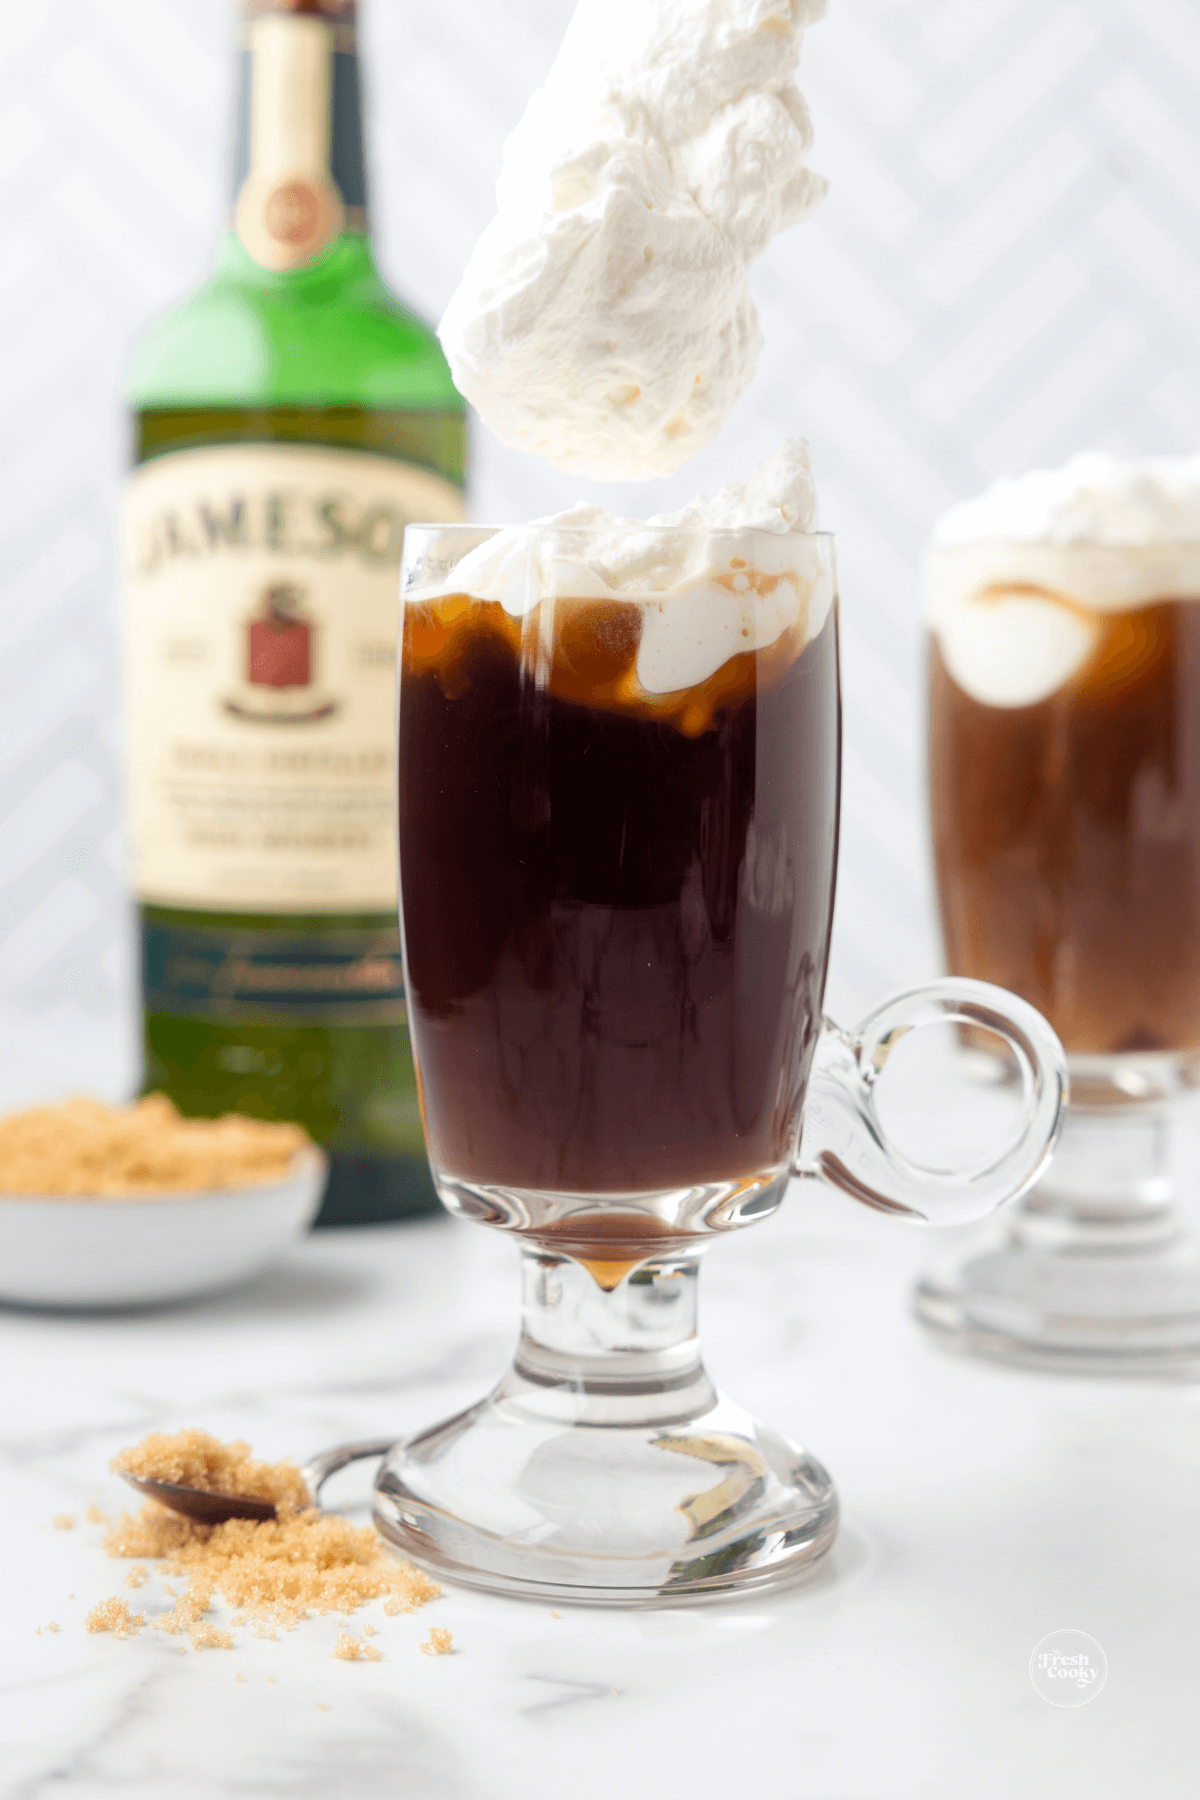 Spooning whipped cream to float on top of hot Irish coffee cocktail.